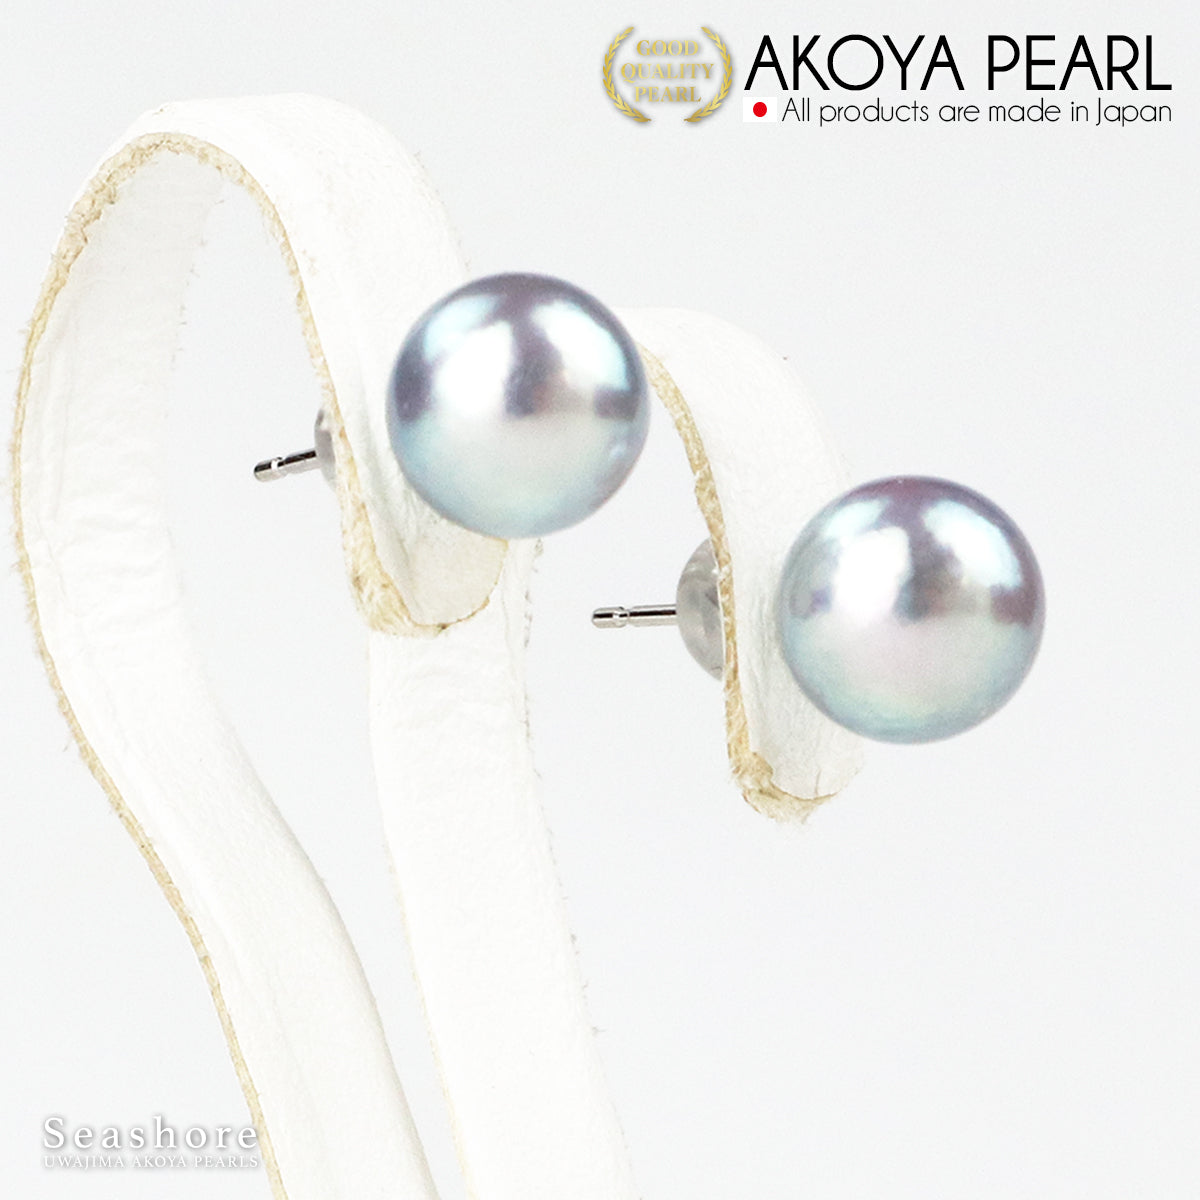 Pearl Earrings, Stud Type, Single Akoya Pearl, Women's [8.0-8.5mm] Free gift included, Storage case included, K14WG Natural Blue